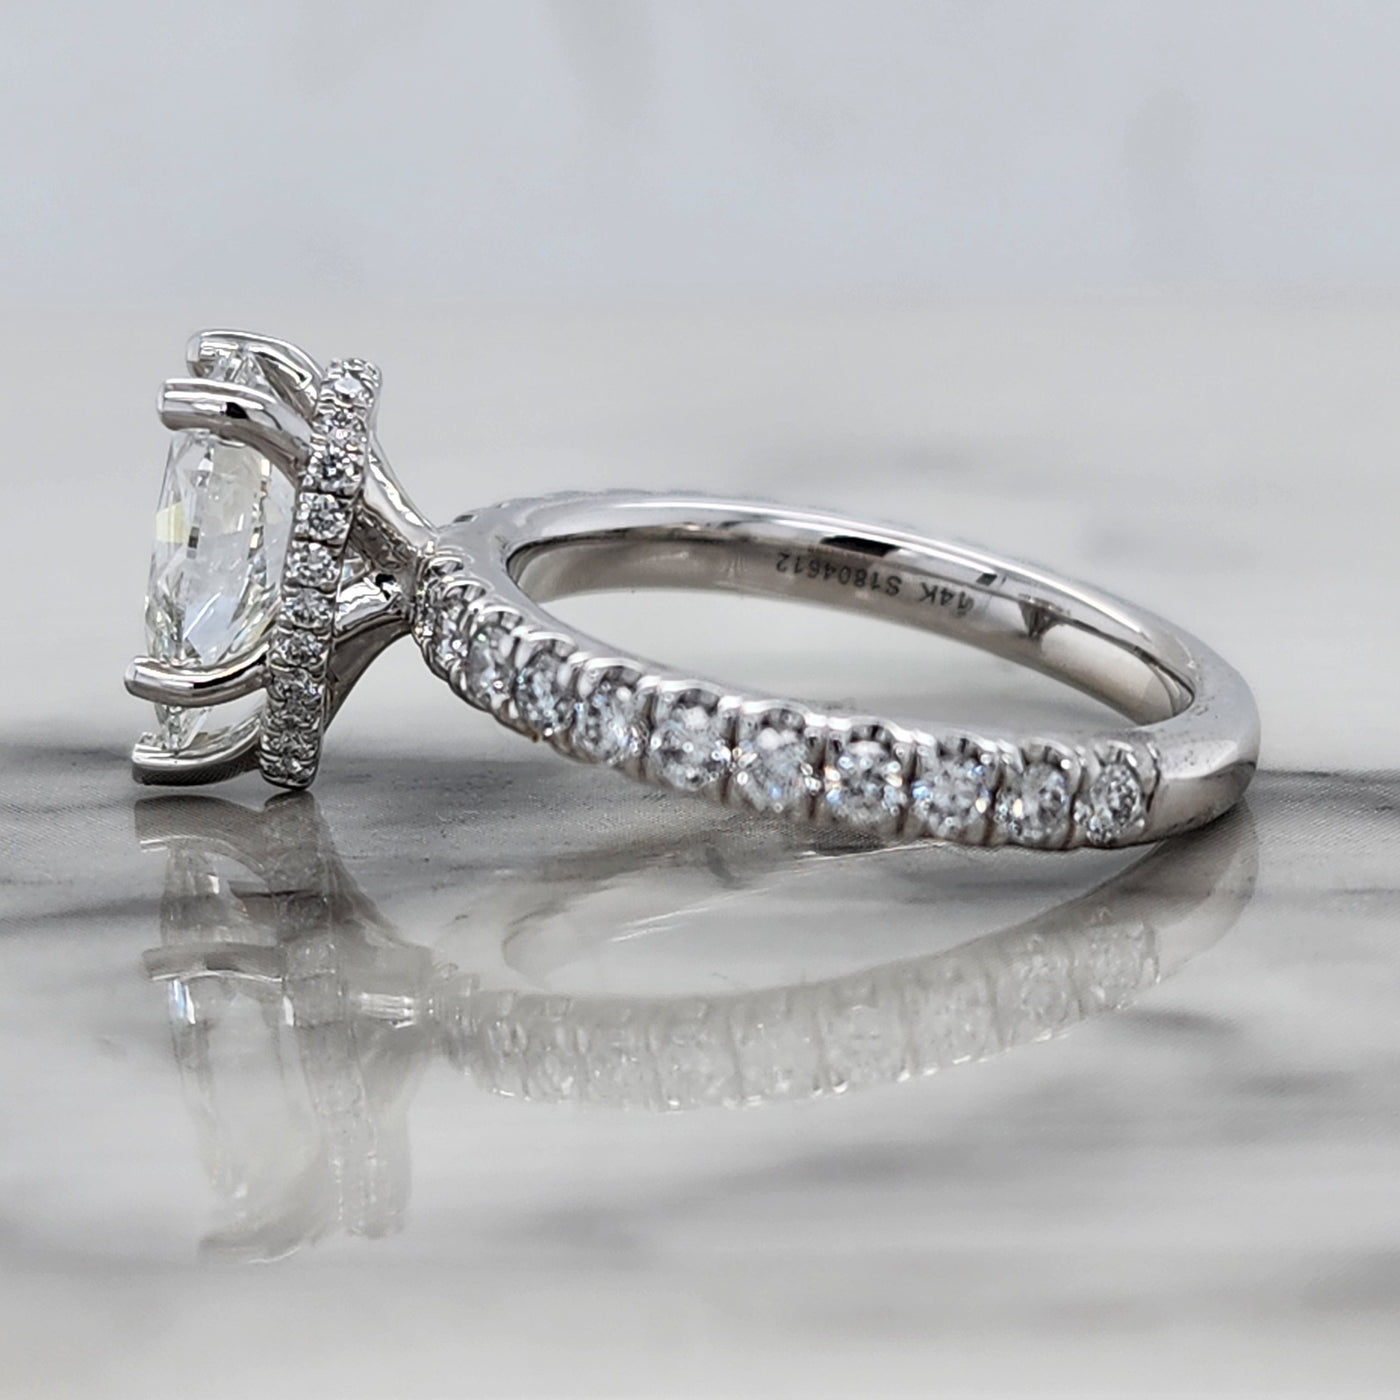 White Gold Pear Engagement Ring With Hidden Halo and Accent Diamonds